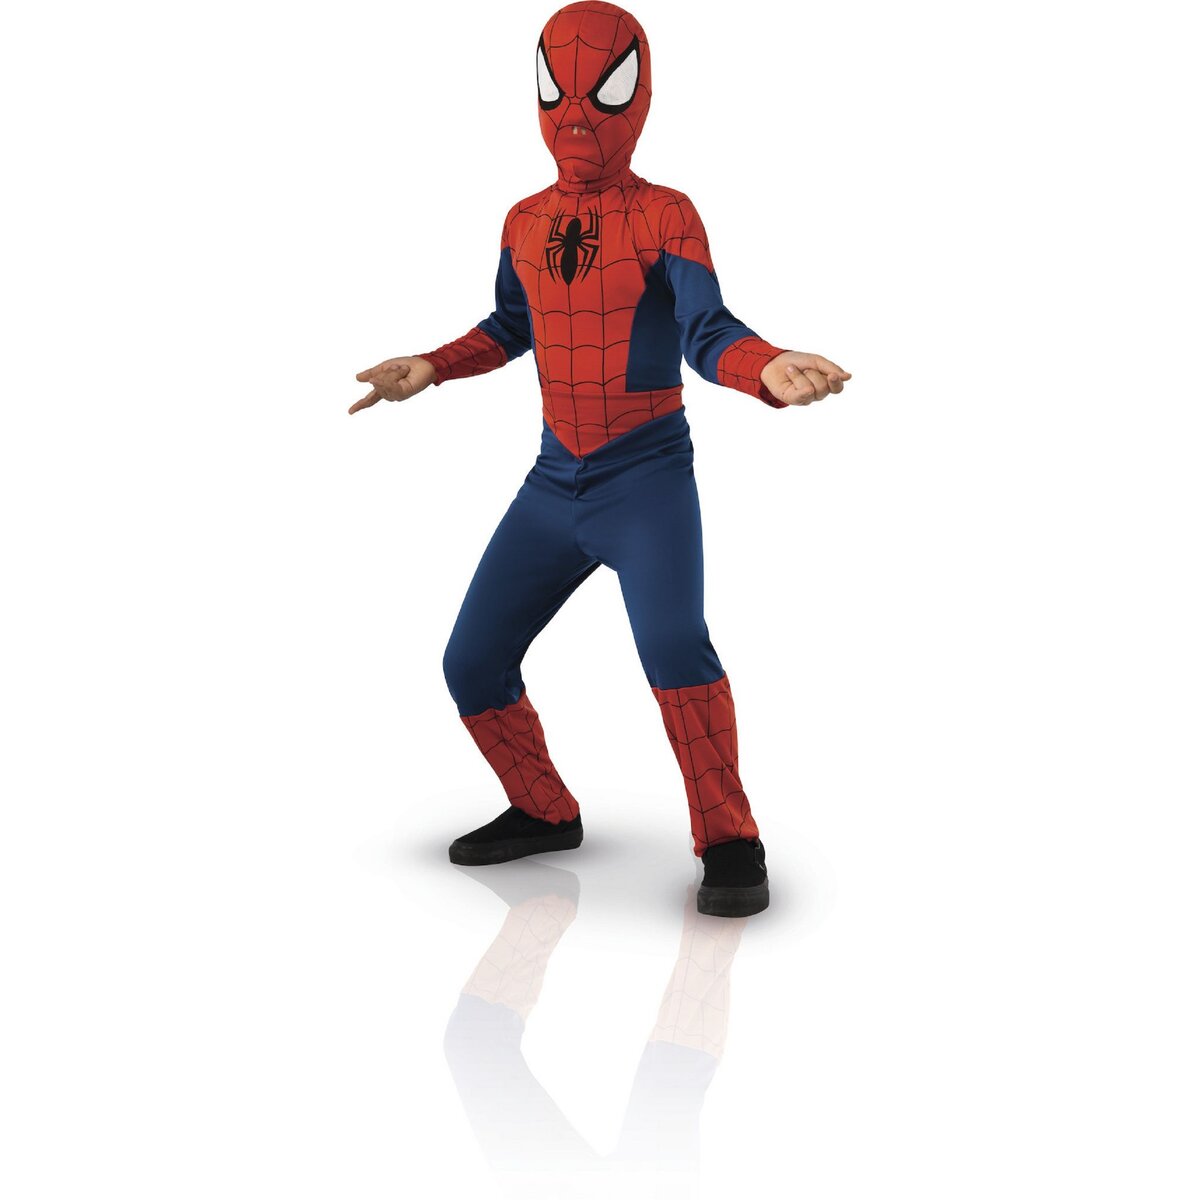 Taille du costume 5-6 ans spider-man classic Rubie's